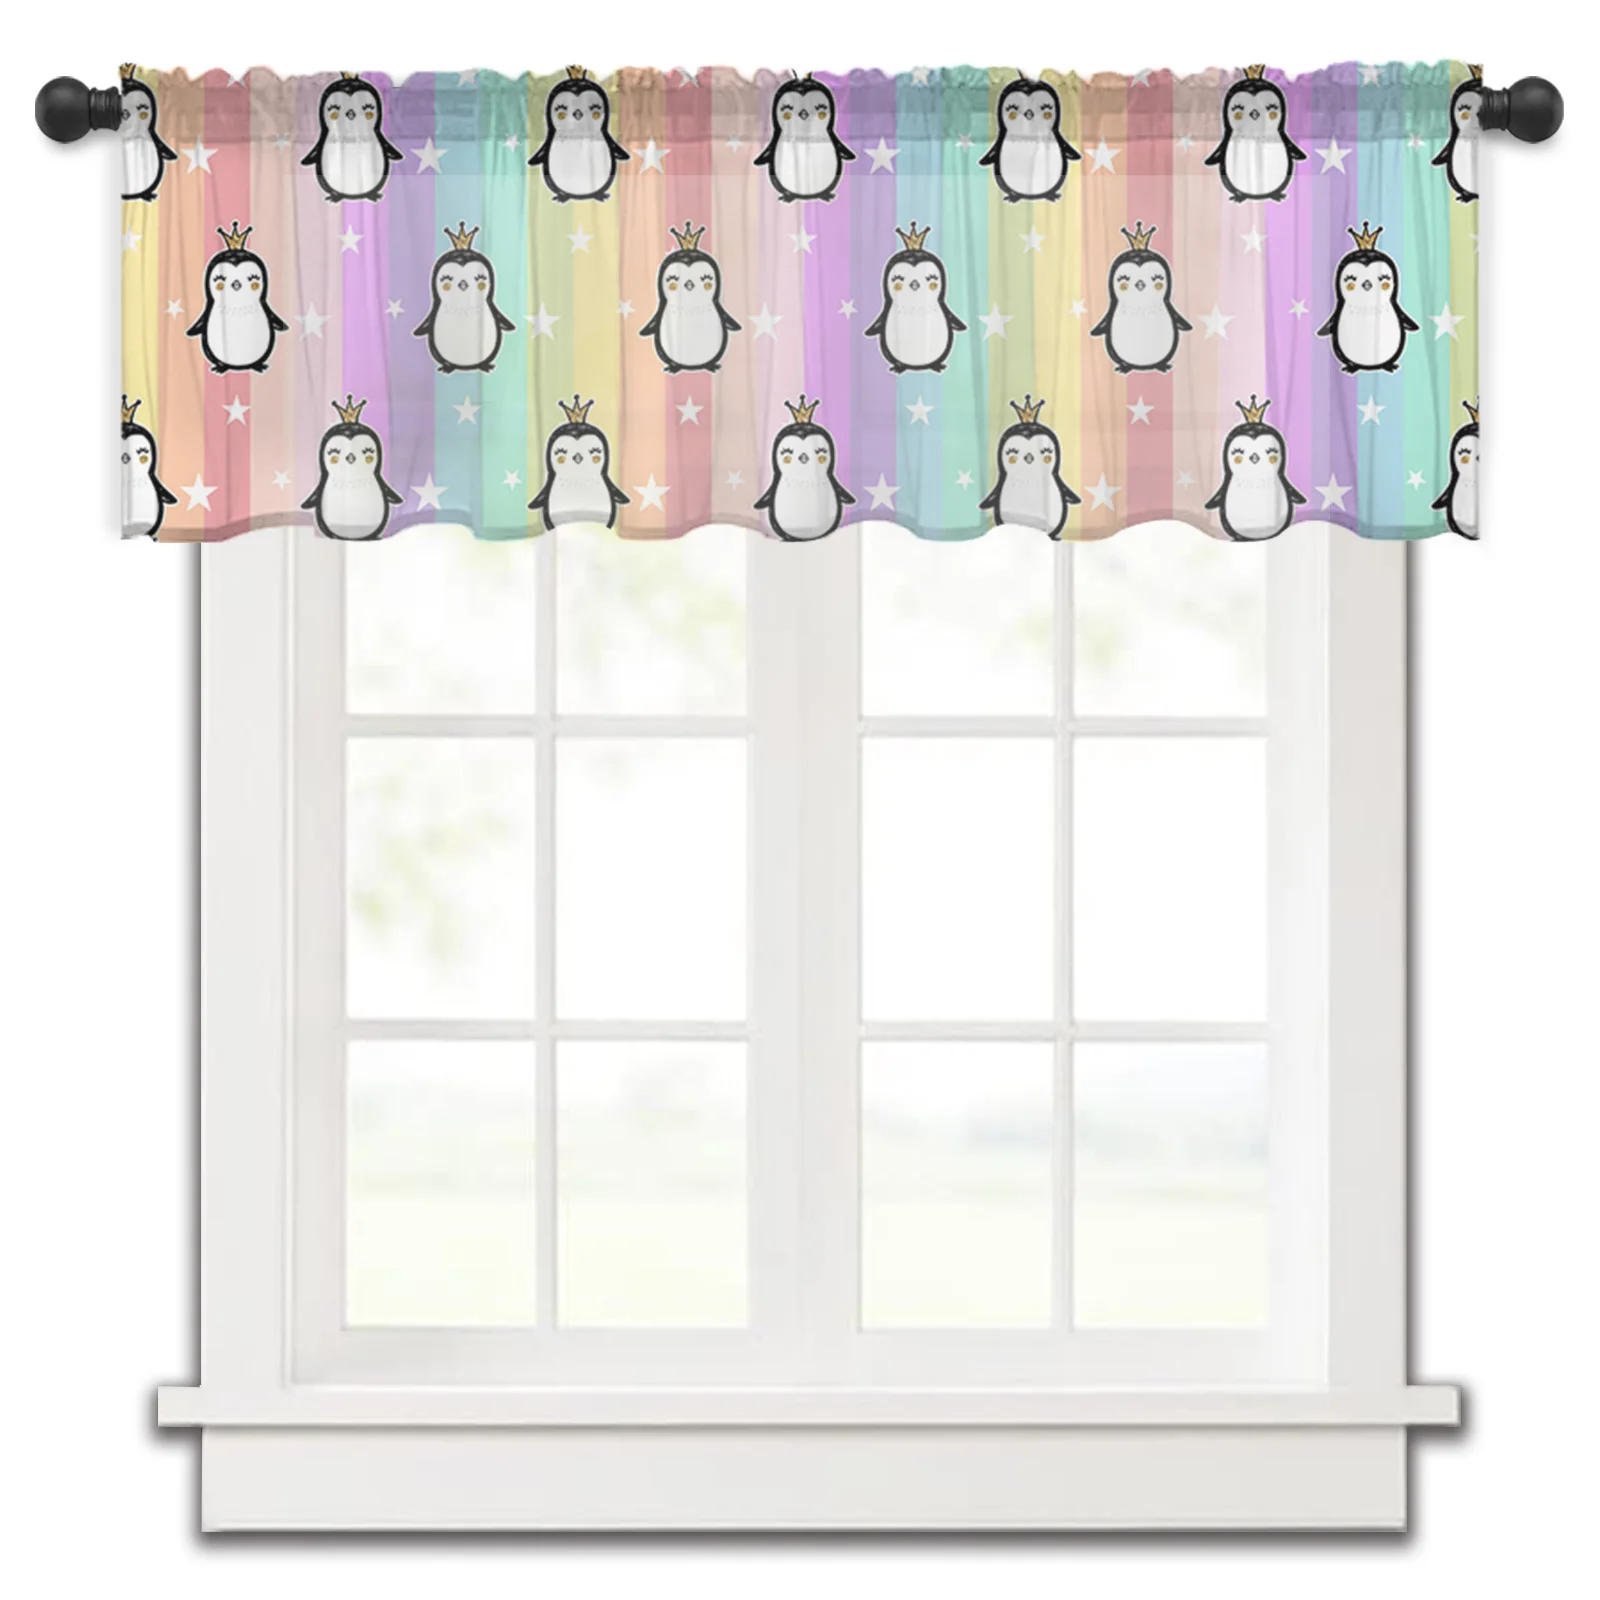 

Penguin Stars Rainbow Stripes Kitchen Small Window Curtain Tulle Sheer Short Curtain Bedroom Living Room Home Decor Voile Drapes